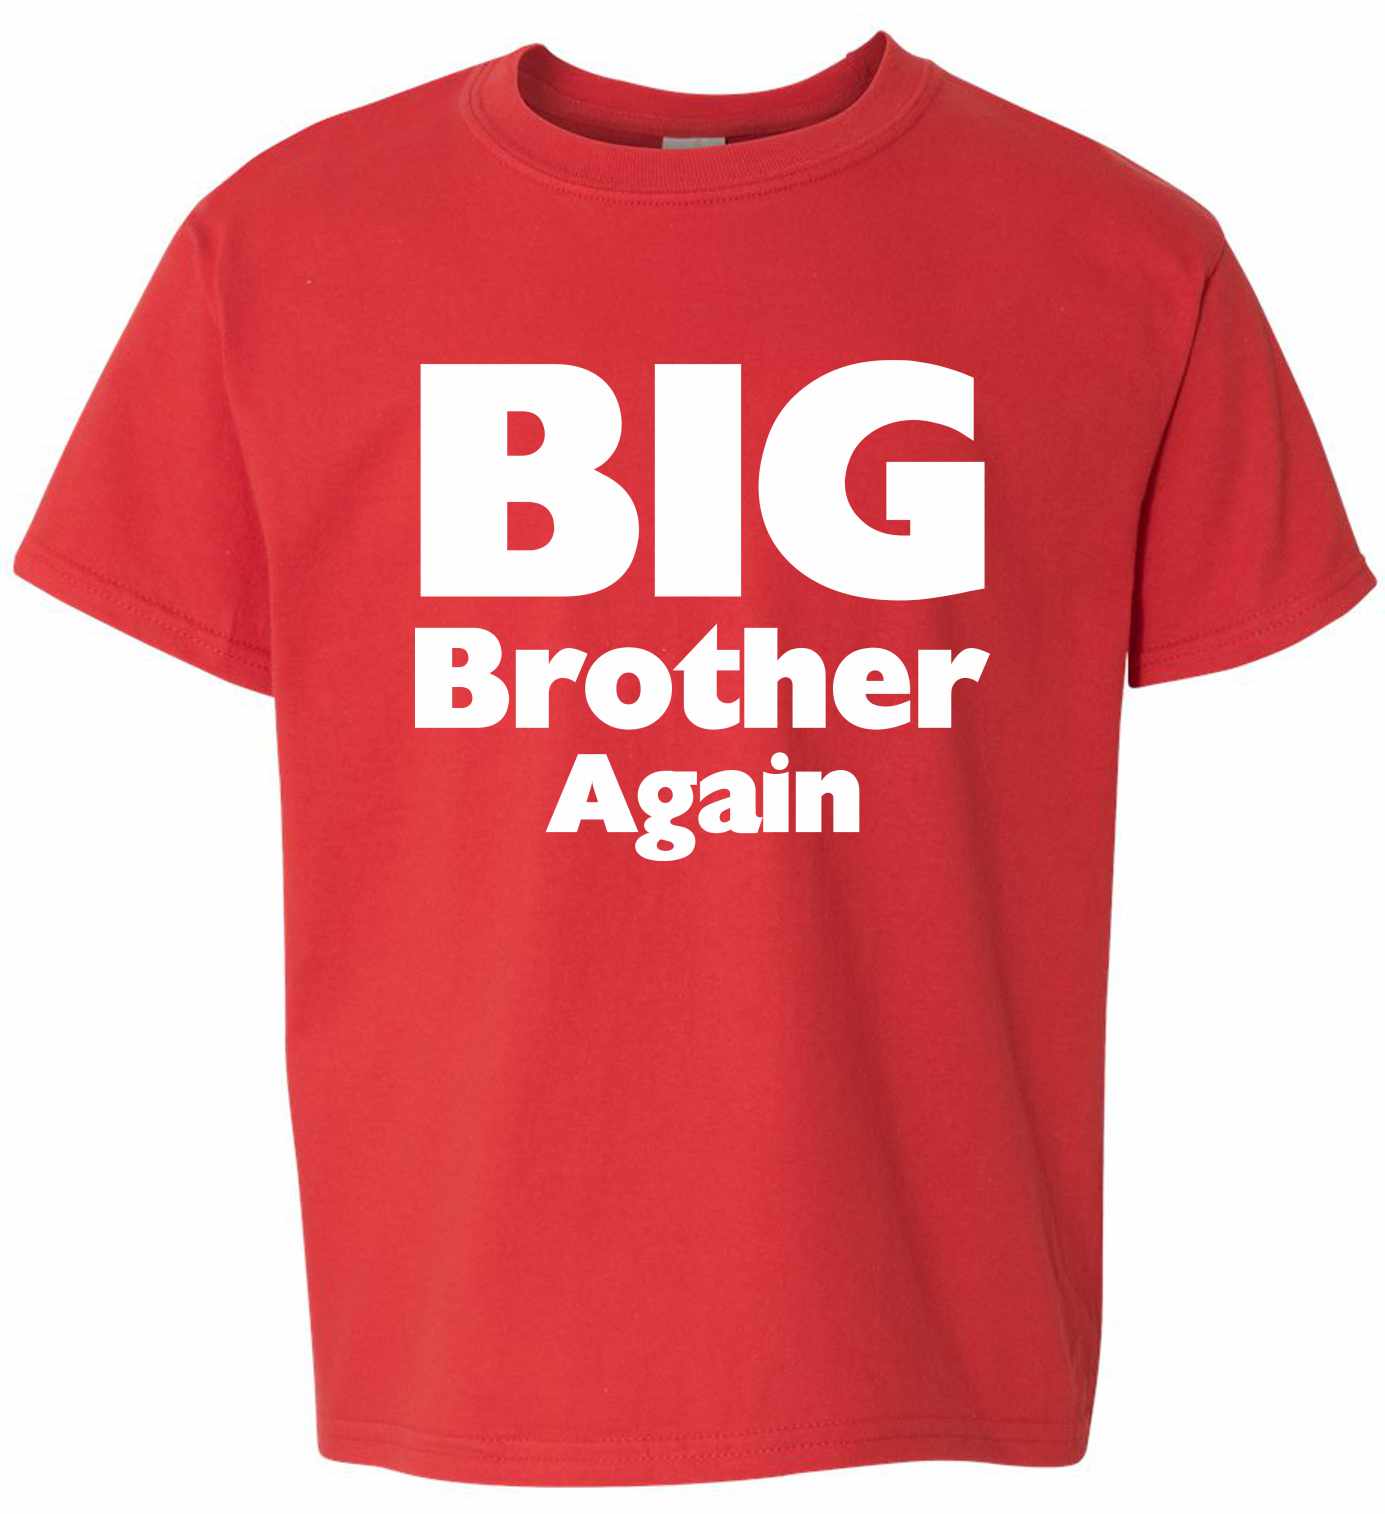 Big Brother Again on Kids T-Shirt